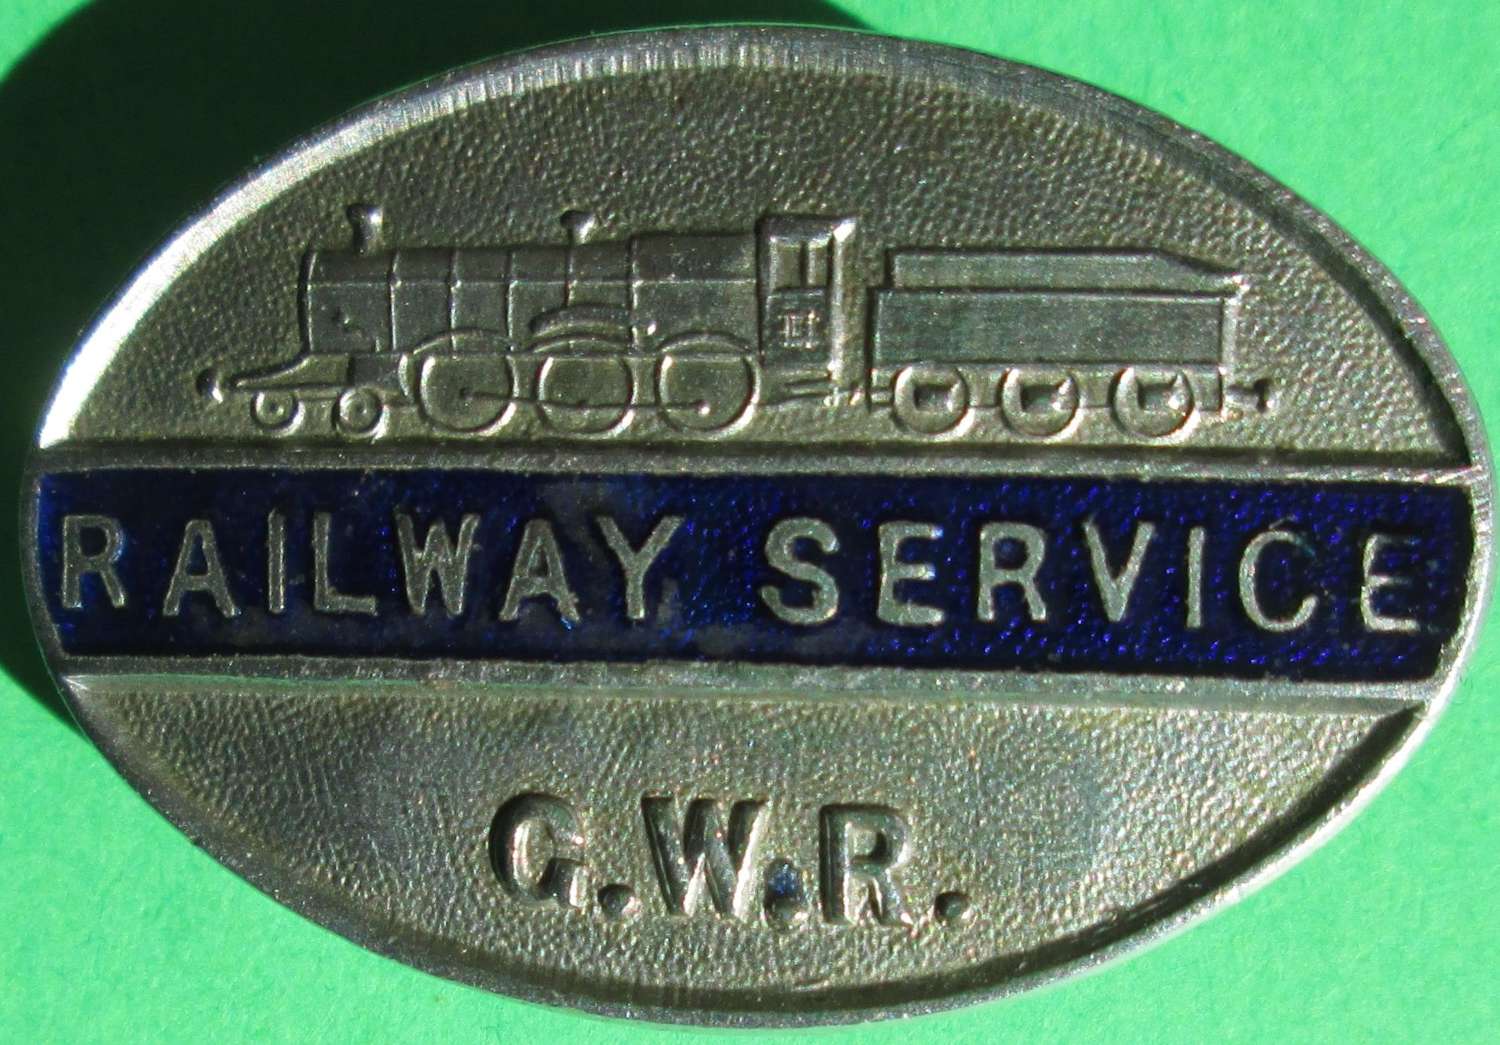 A RAILWAY SERVICE LAPEL BADGE FOR THE GREAT WESTERN RAILWAY